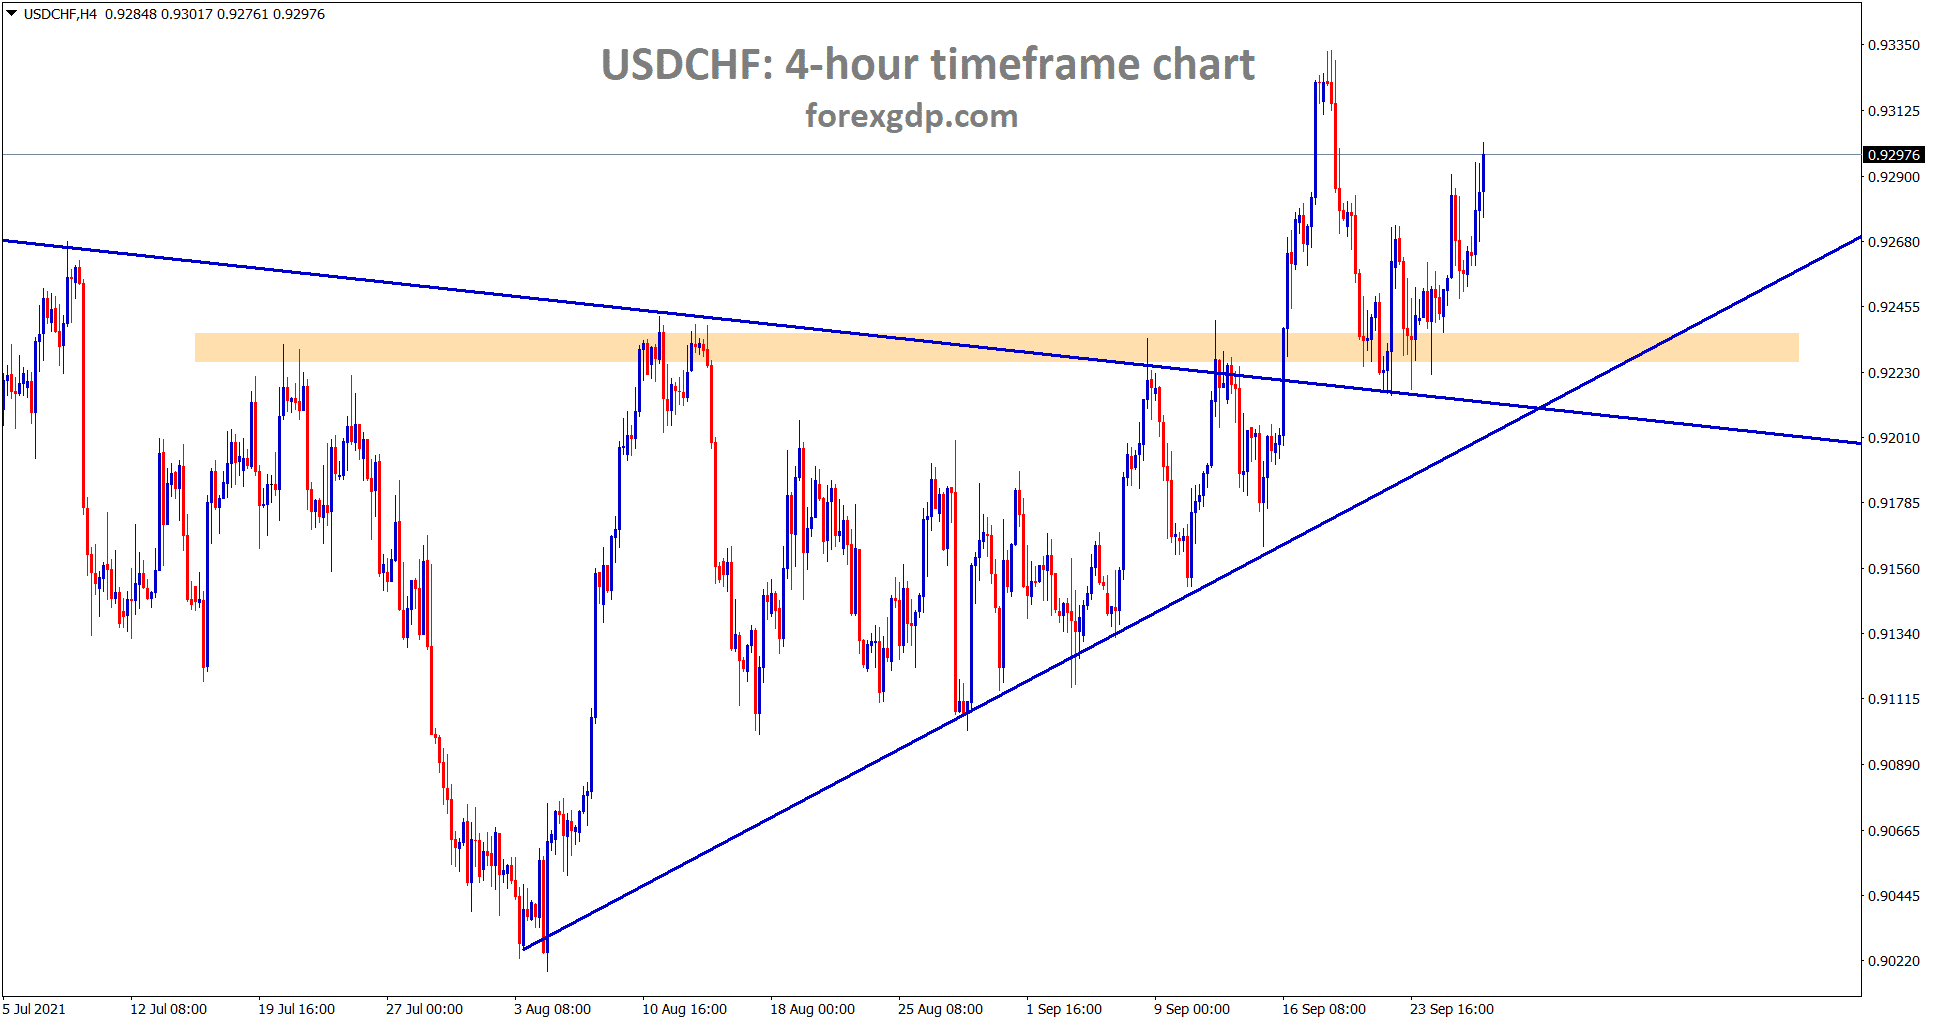 USDCHF is rebounding from the retest zone of the symmetrical triangle